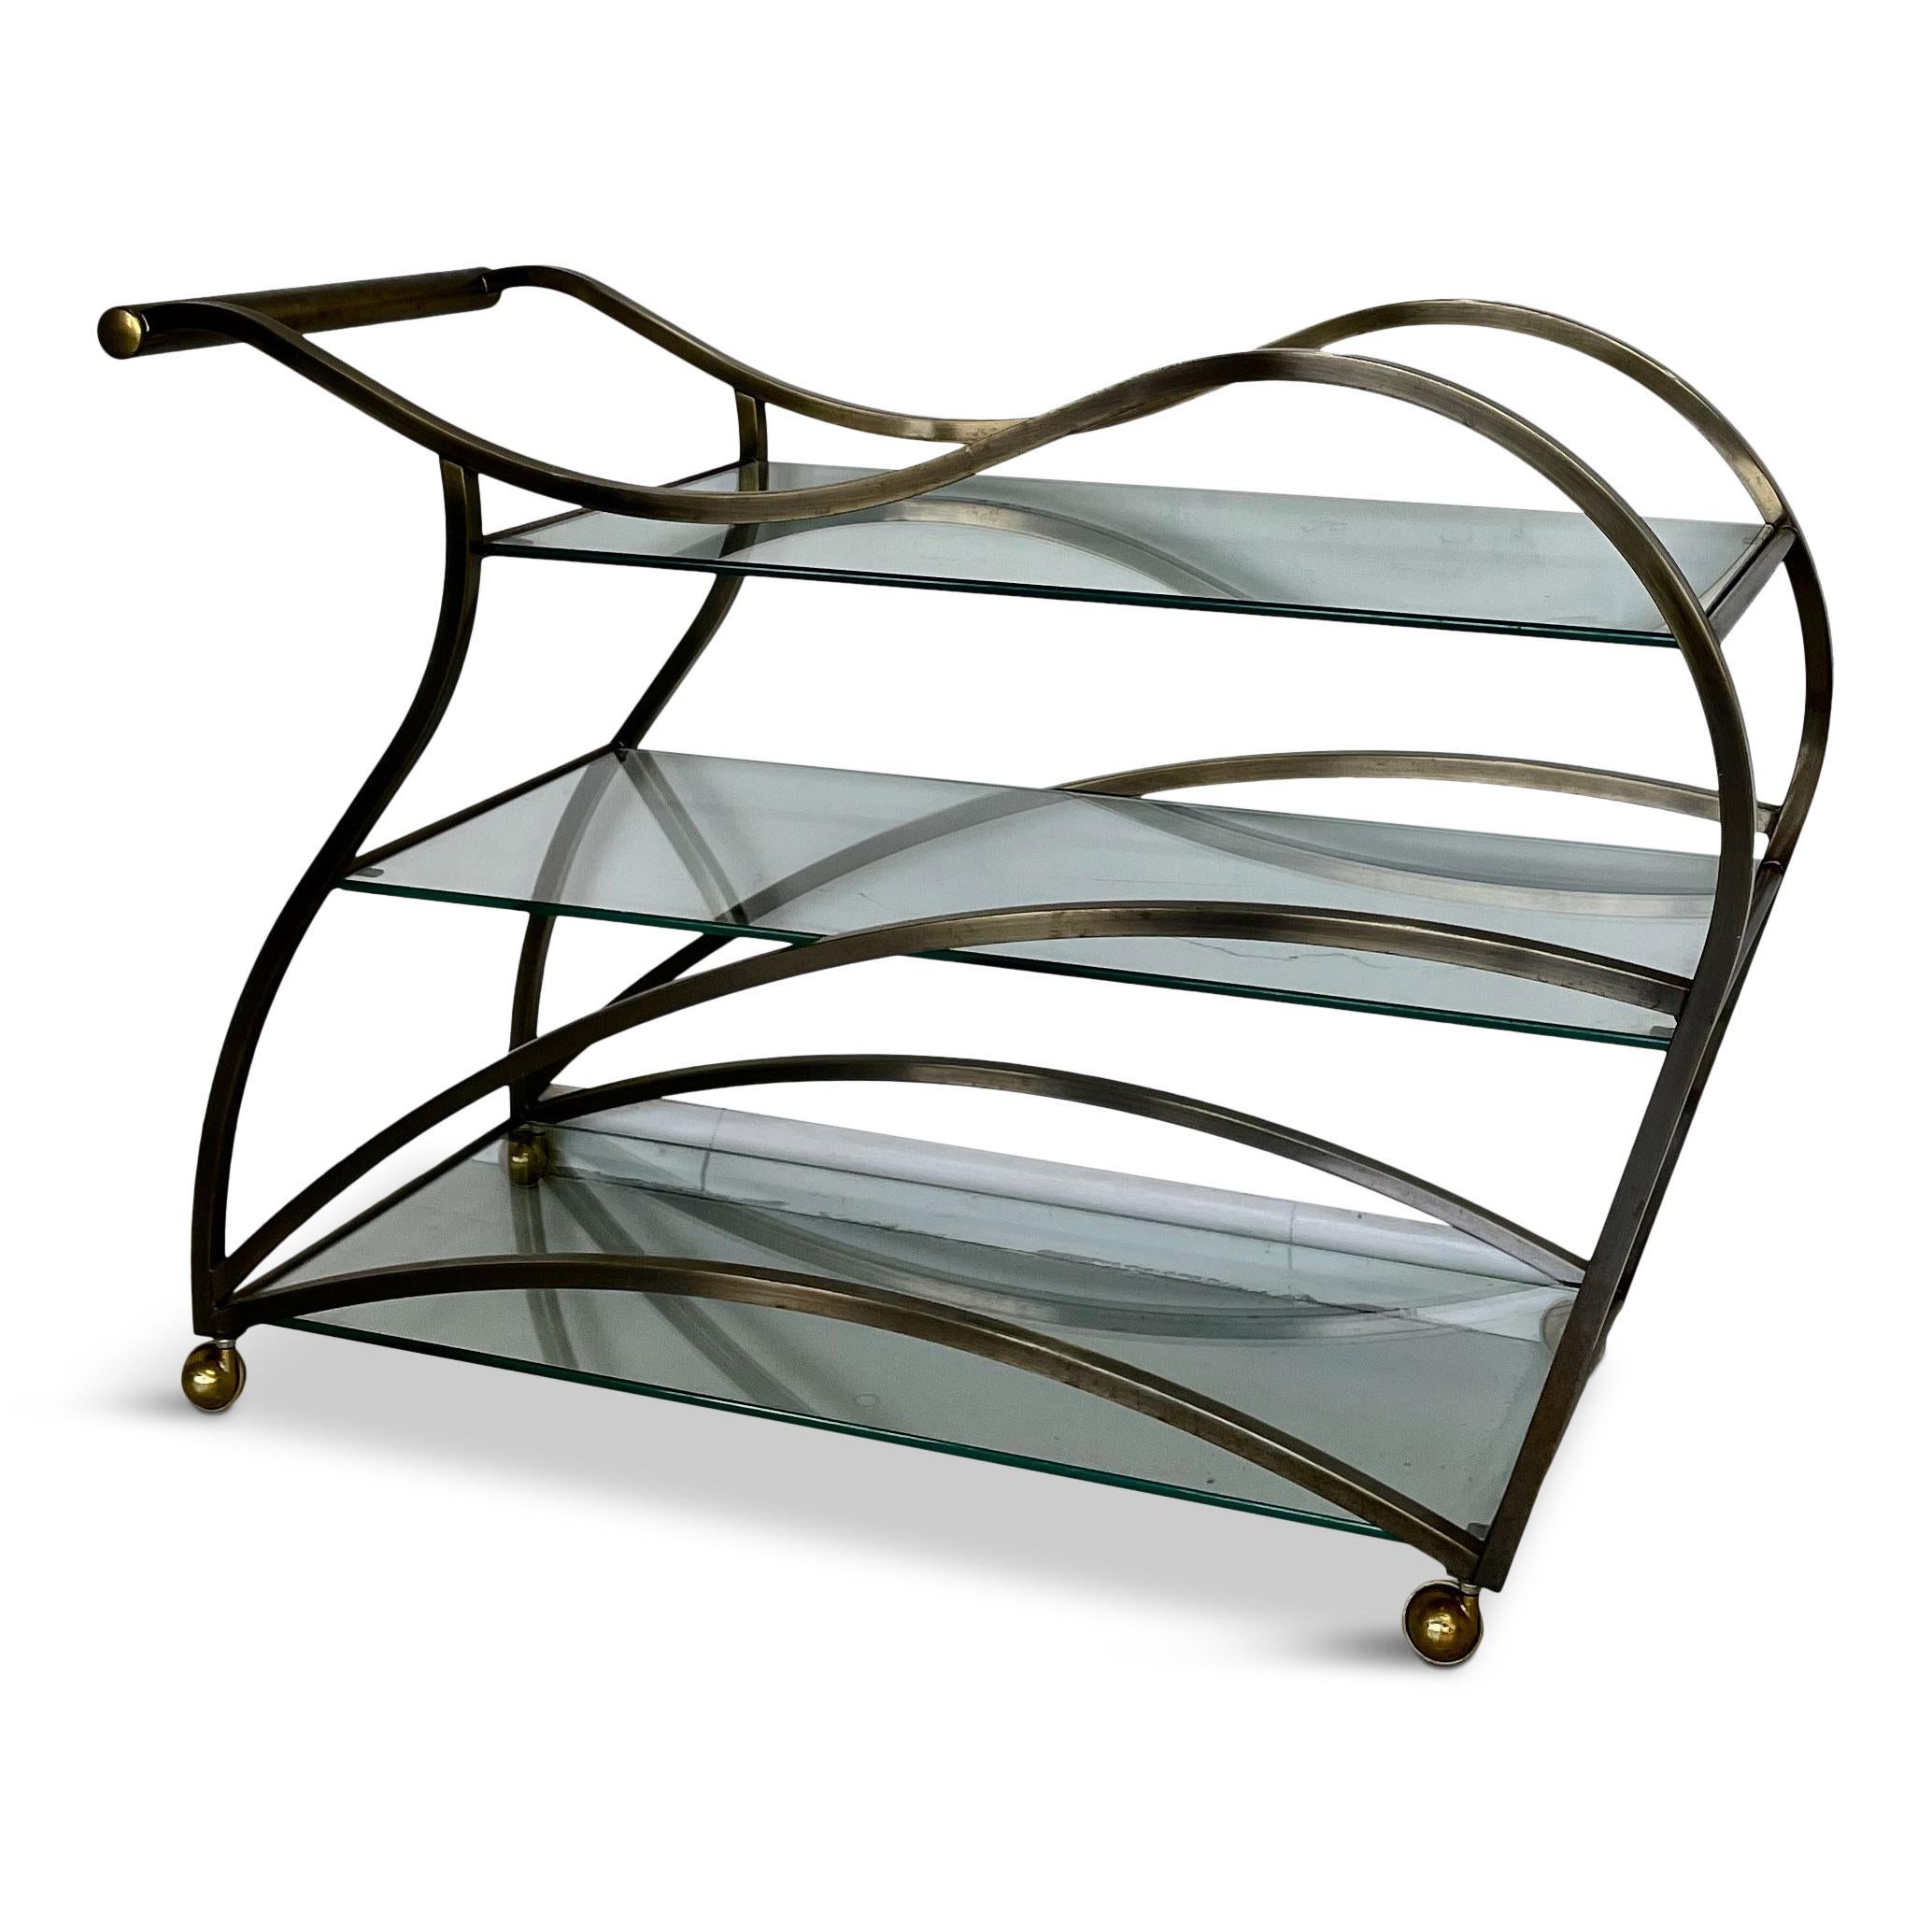 Sexy and curvaceous sculptural bar or tea cart manufactured by high quality furniture maker, Design Institute of America. This rolling cart has a metal frame with an antiqued brass finish and three, 3/8 inch thick, clear glass shelves. Its large